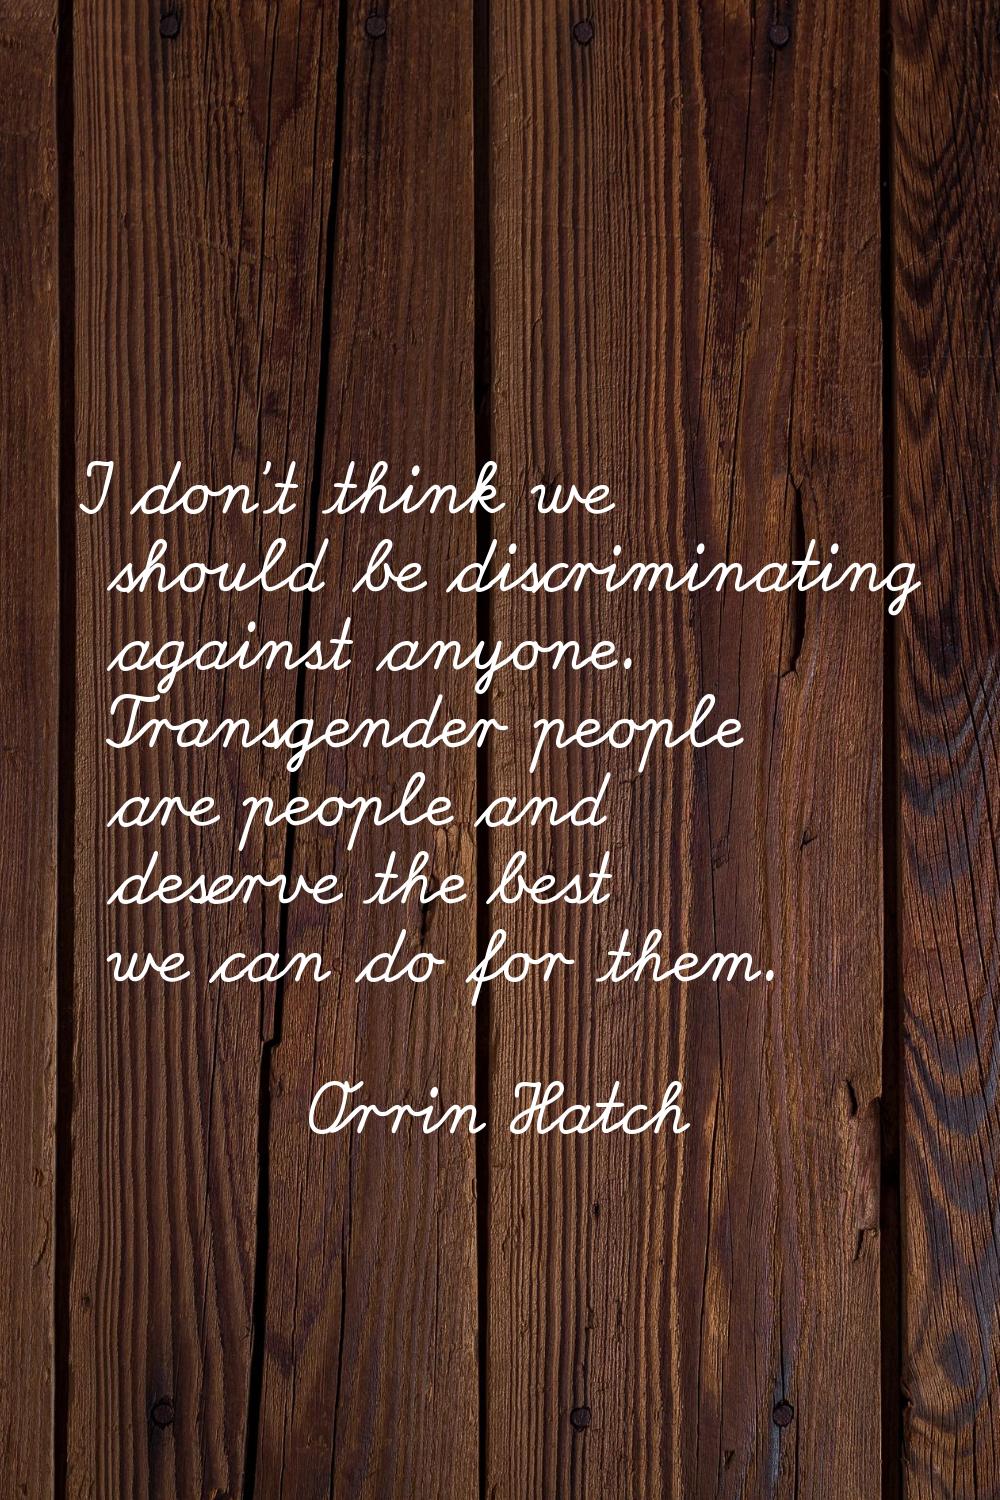 I don't think we should be discriminating against anyone. Transgender people are people and deserve